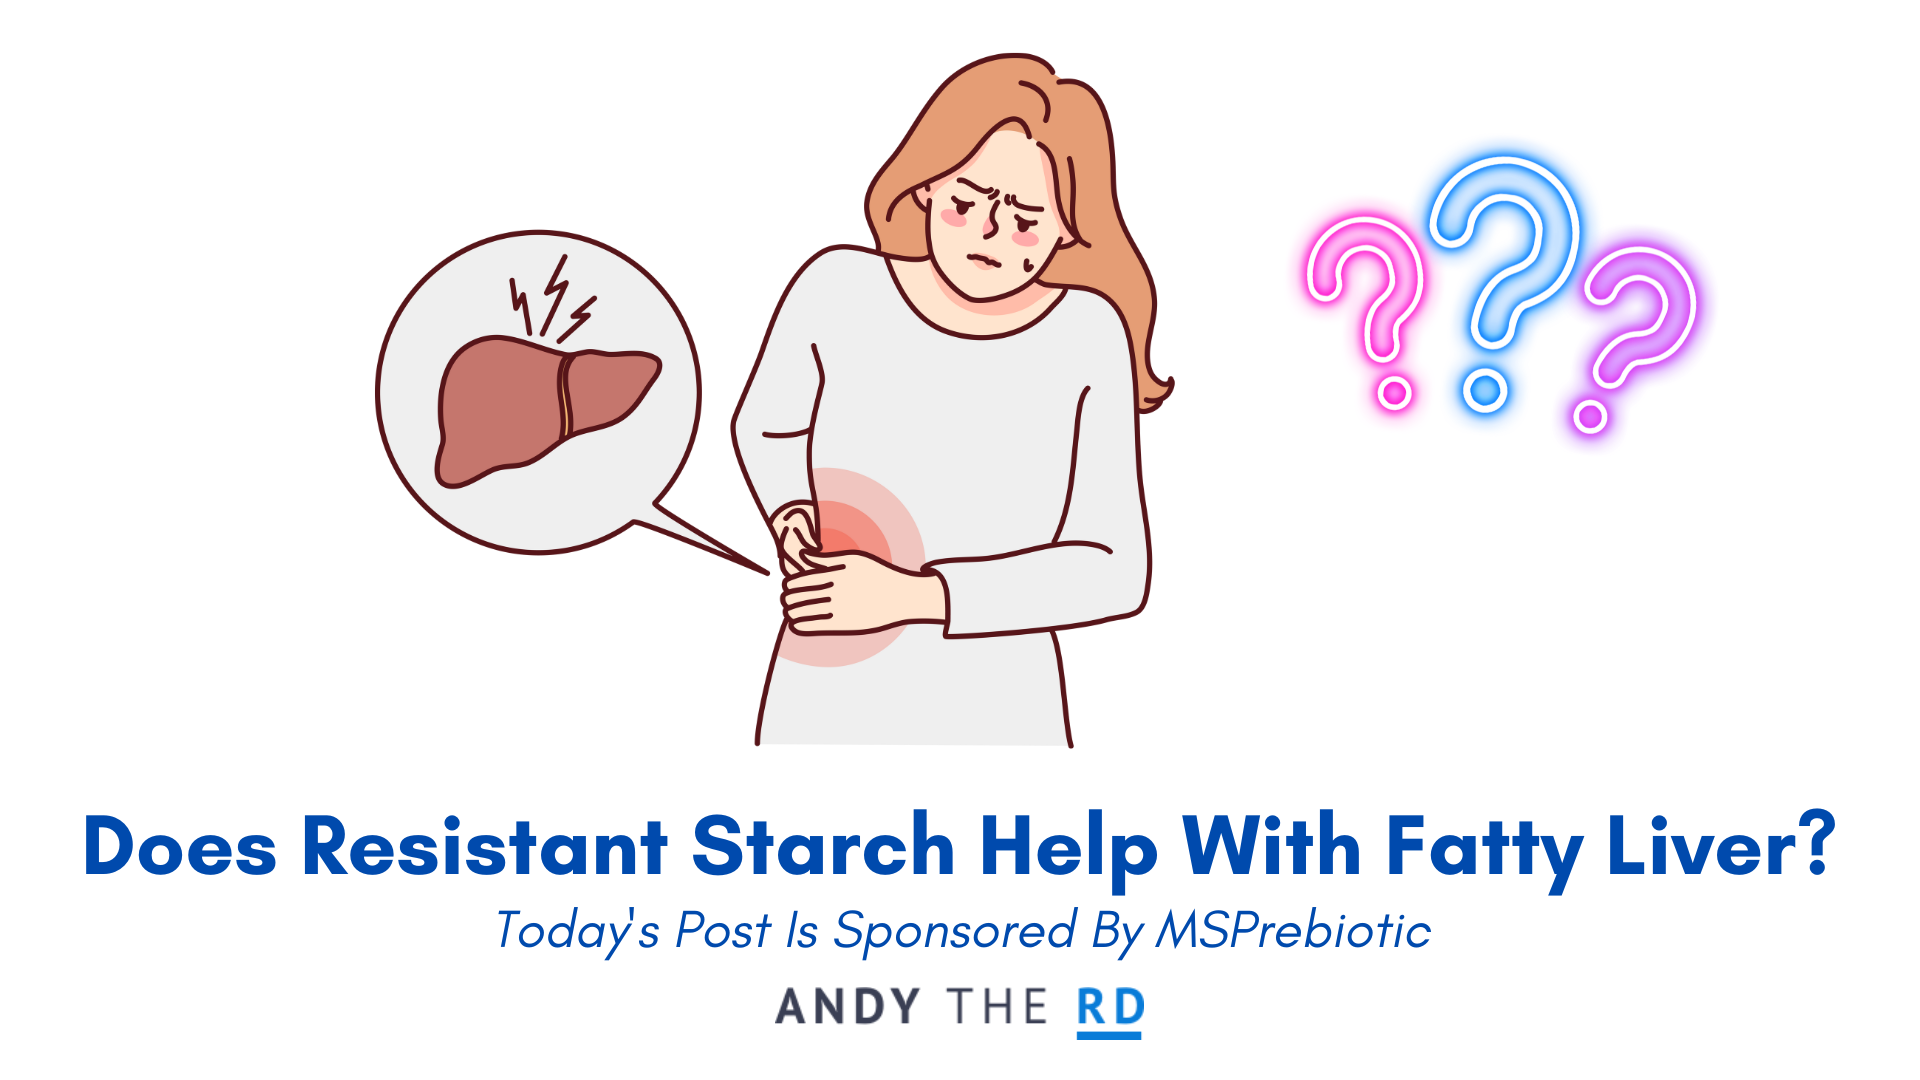 Resistant Starch May Help With Fatty Liver